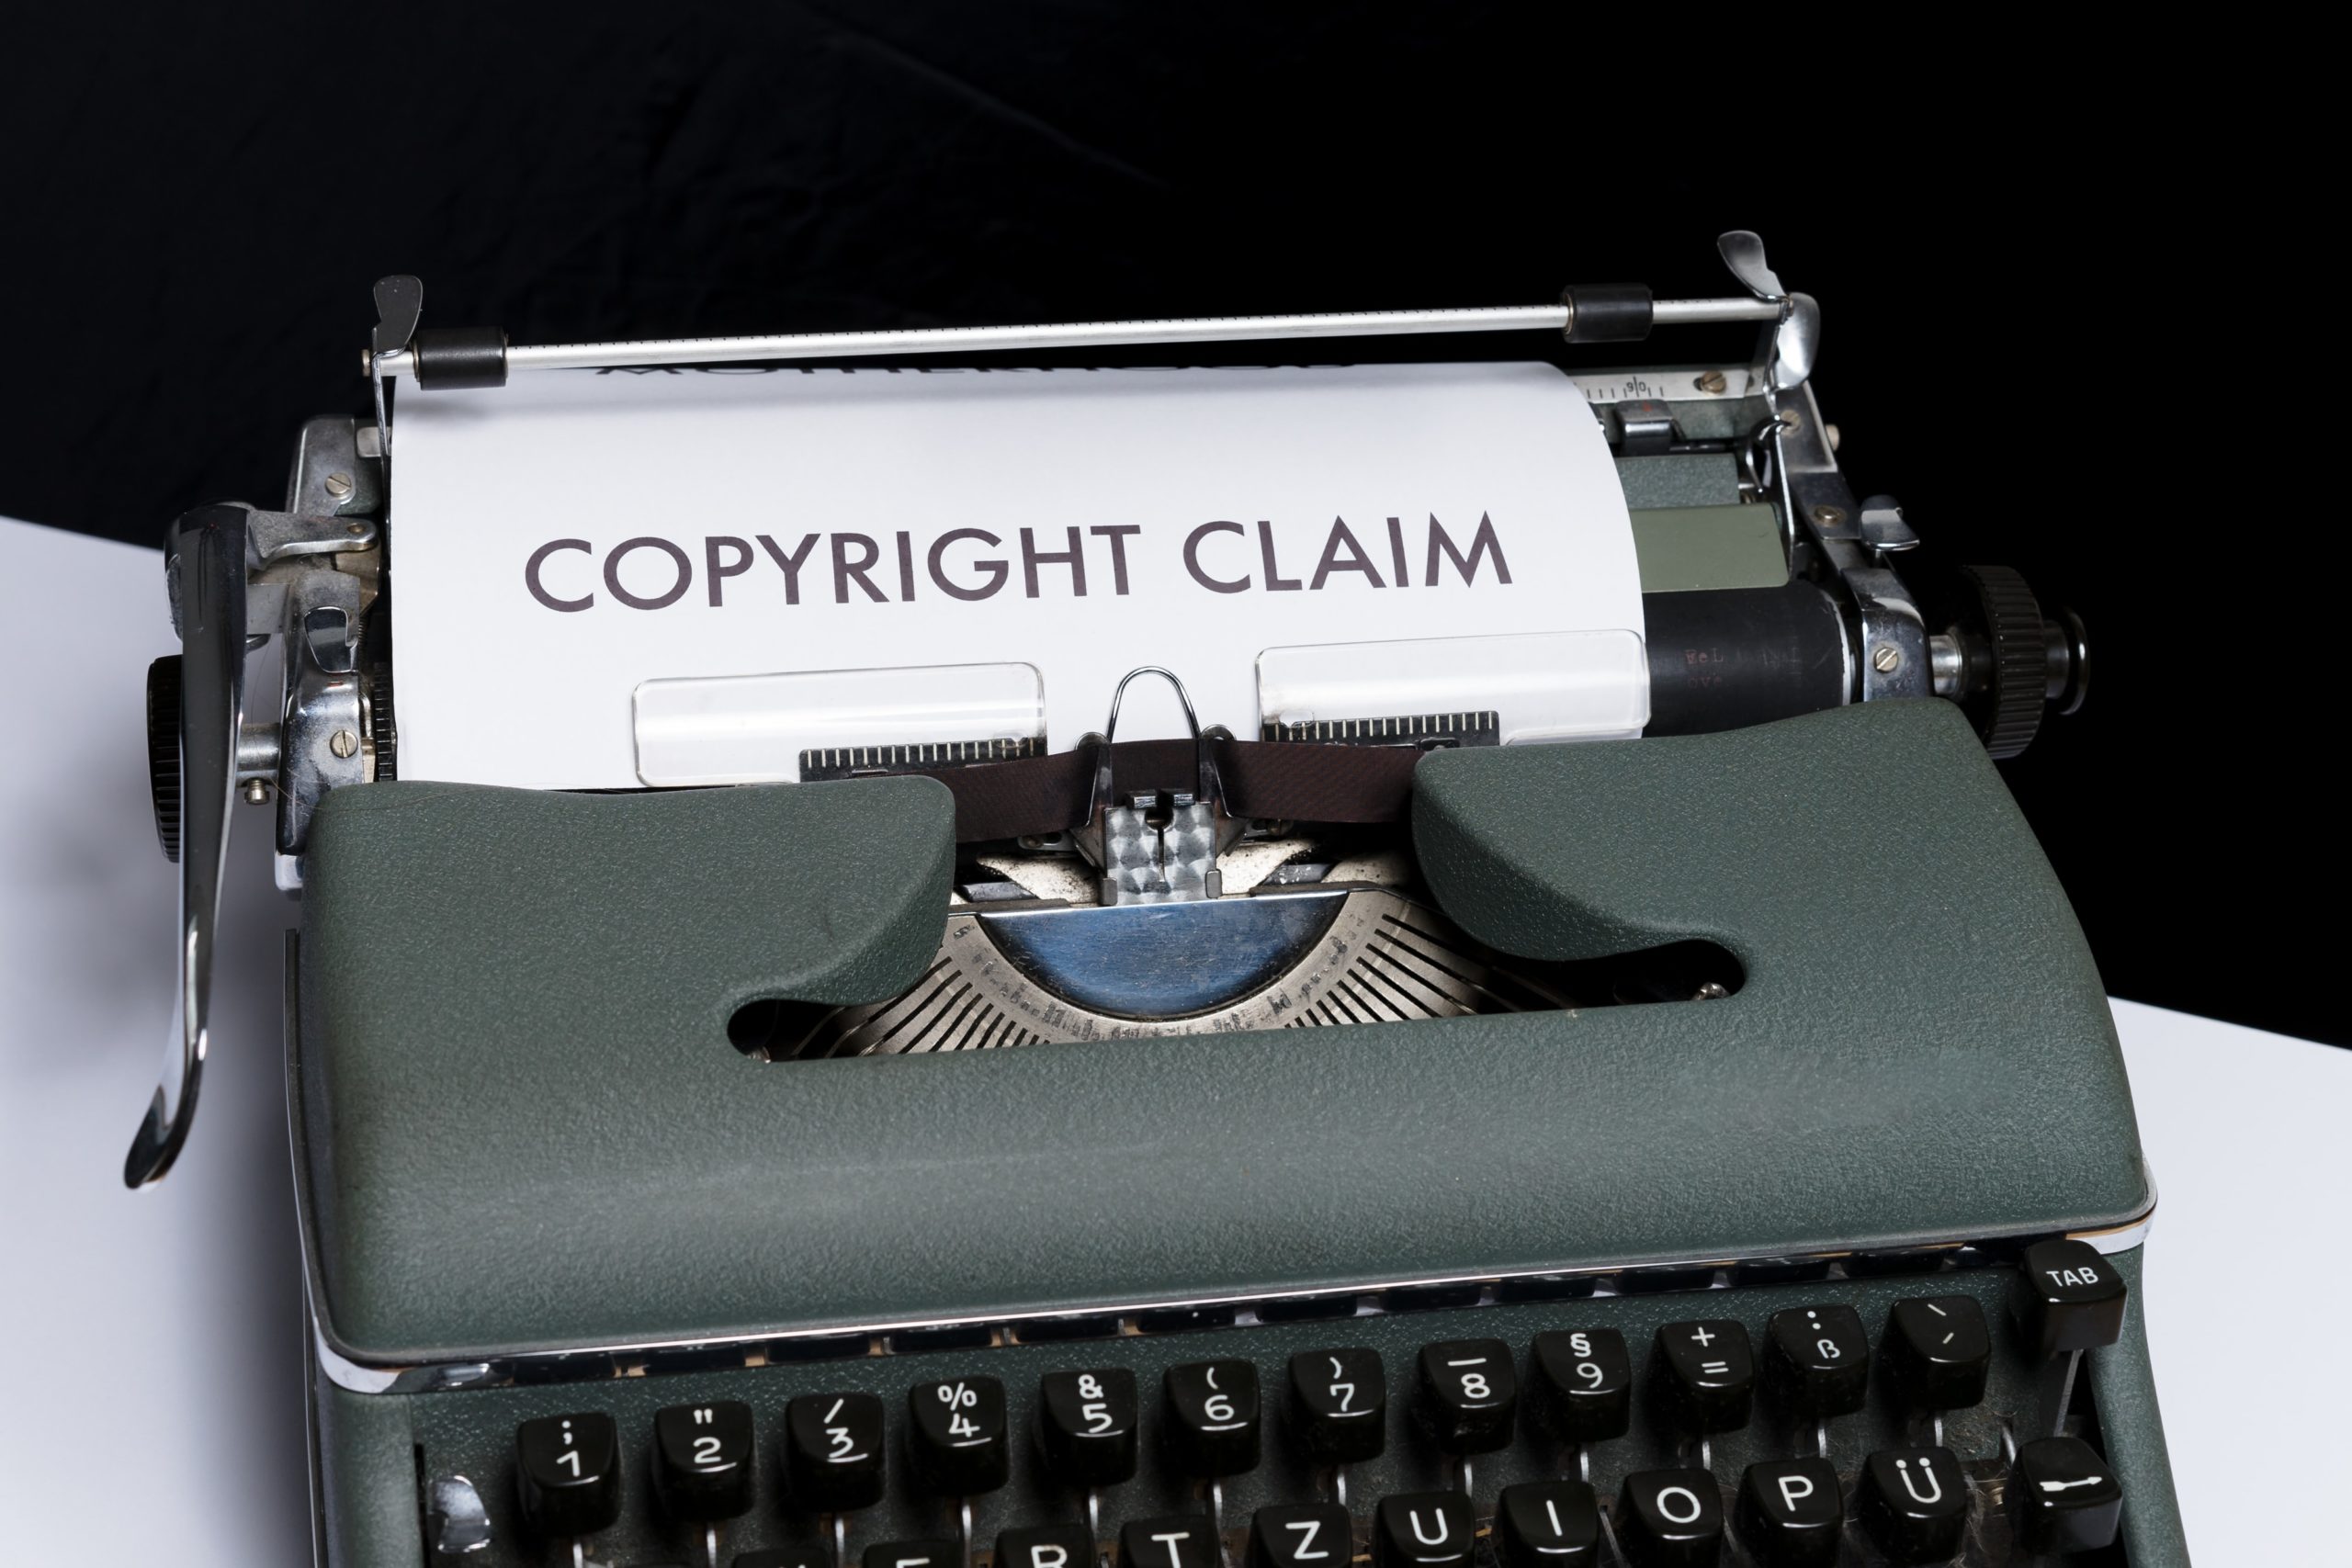 A typewriter with a piece of paper in the carriage with the words “copyright claim” typed on it.